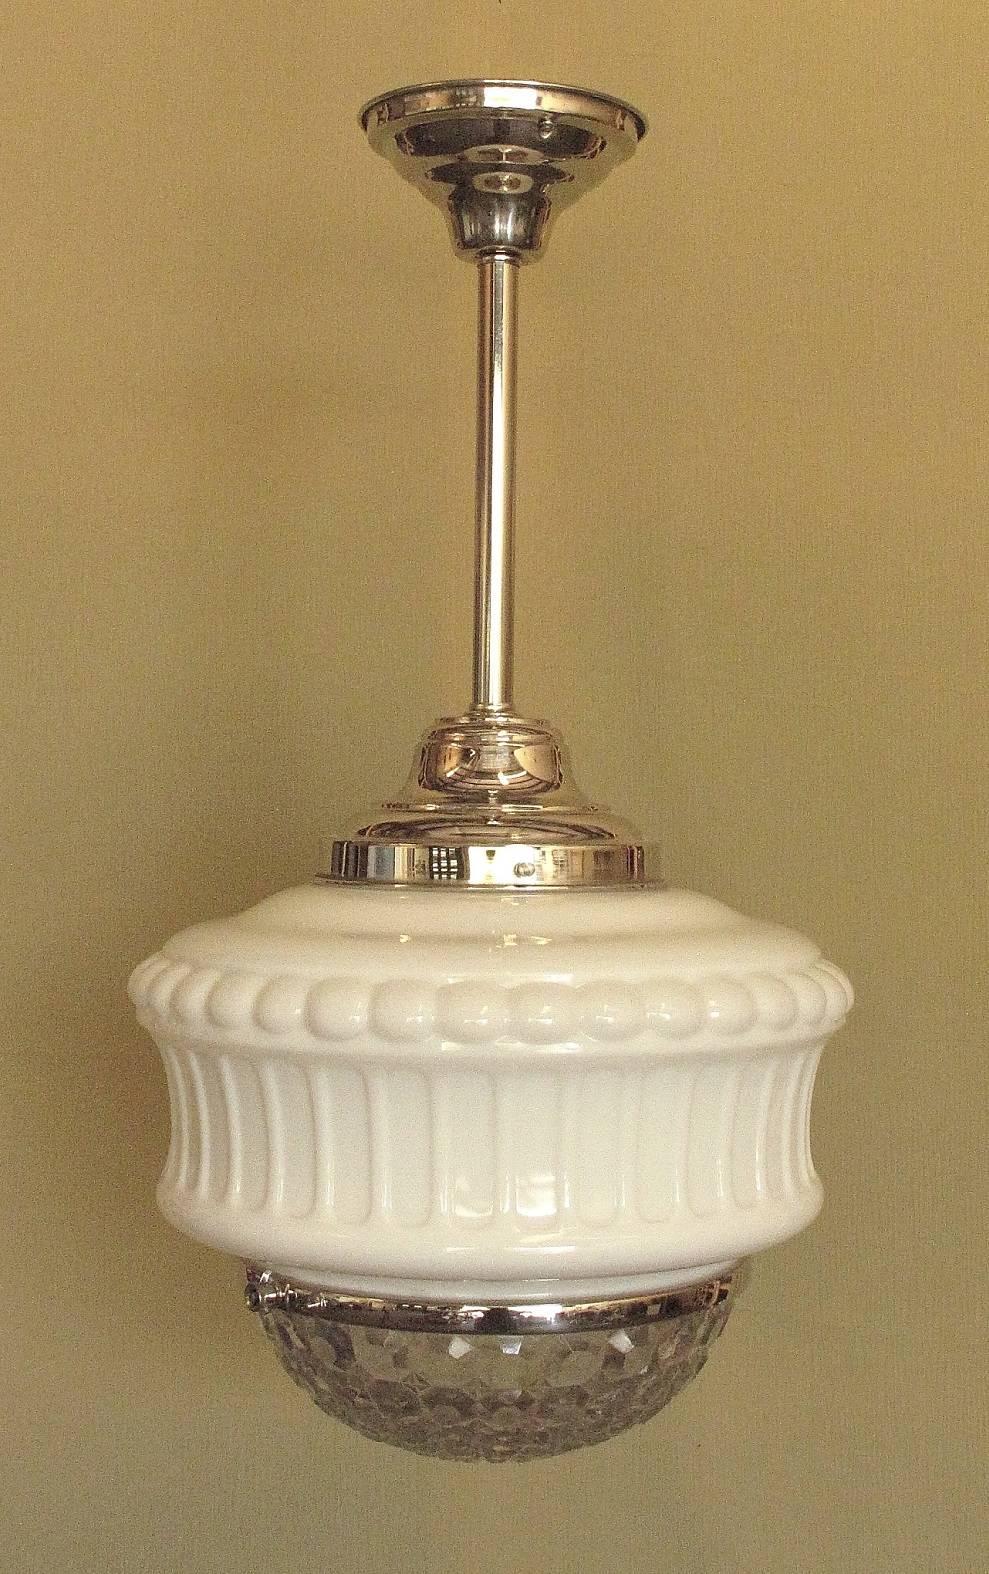 Three available but there may be more coming in.
These are 1920s vintage bank lobby, drugstore, department store, or schoolhouse electric lighting fixtures. They are two pieces of glass held together by a metal band which can expand to allow the